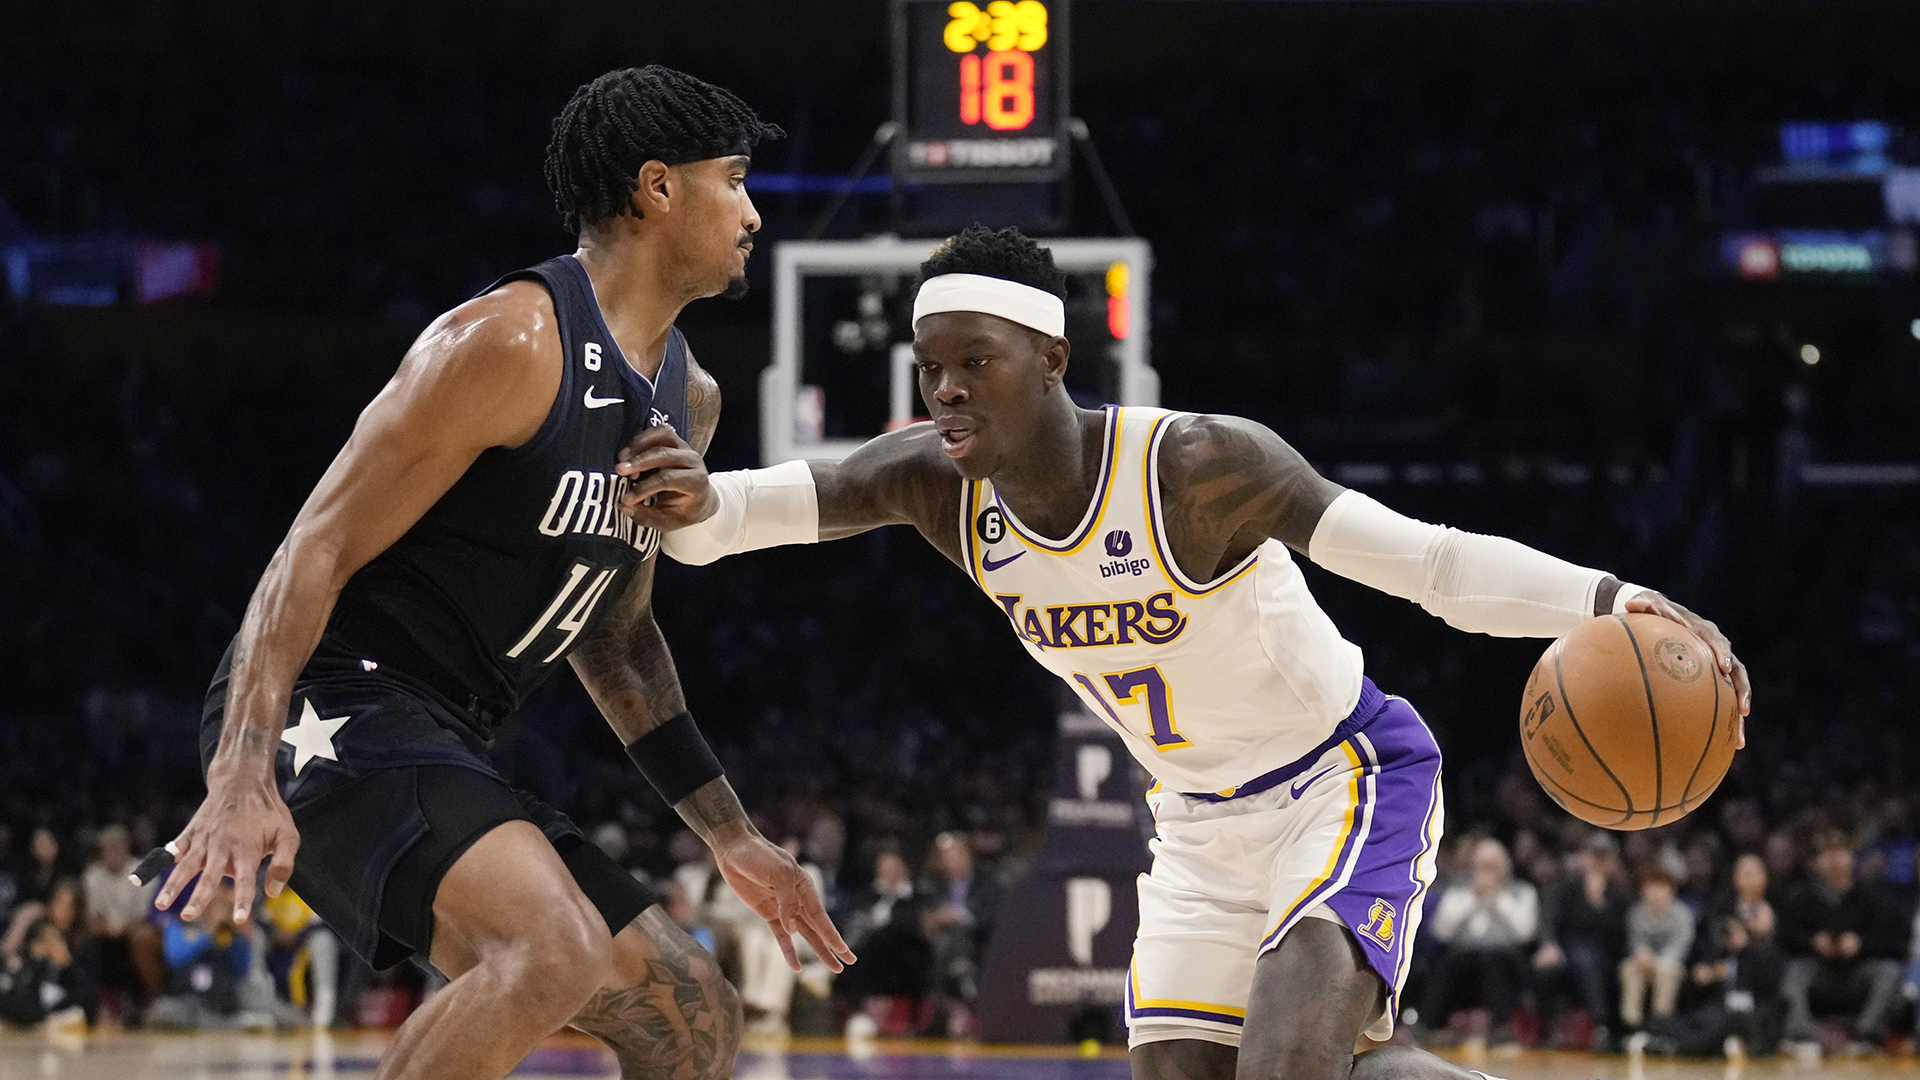 Lakers Rally, Repeat: Los Angeles comes back from 13 down to win